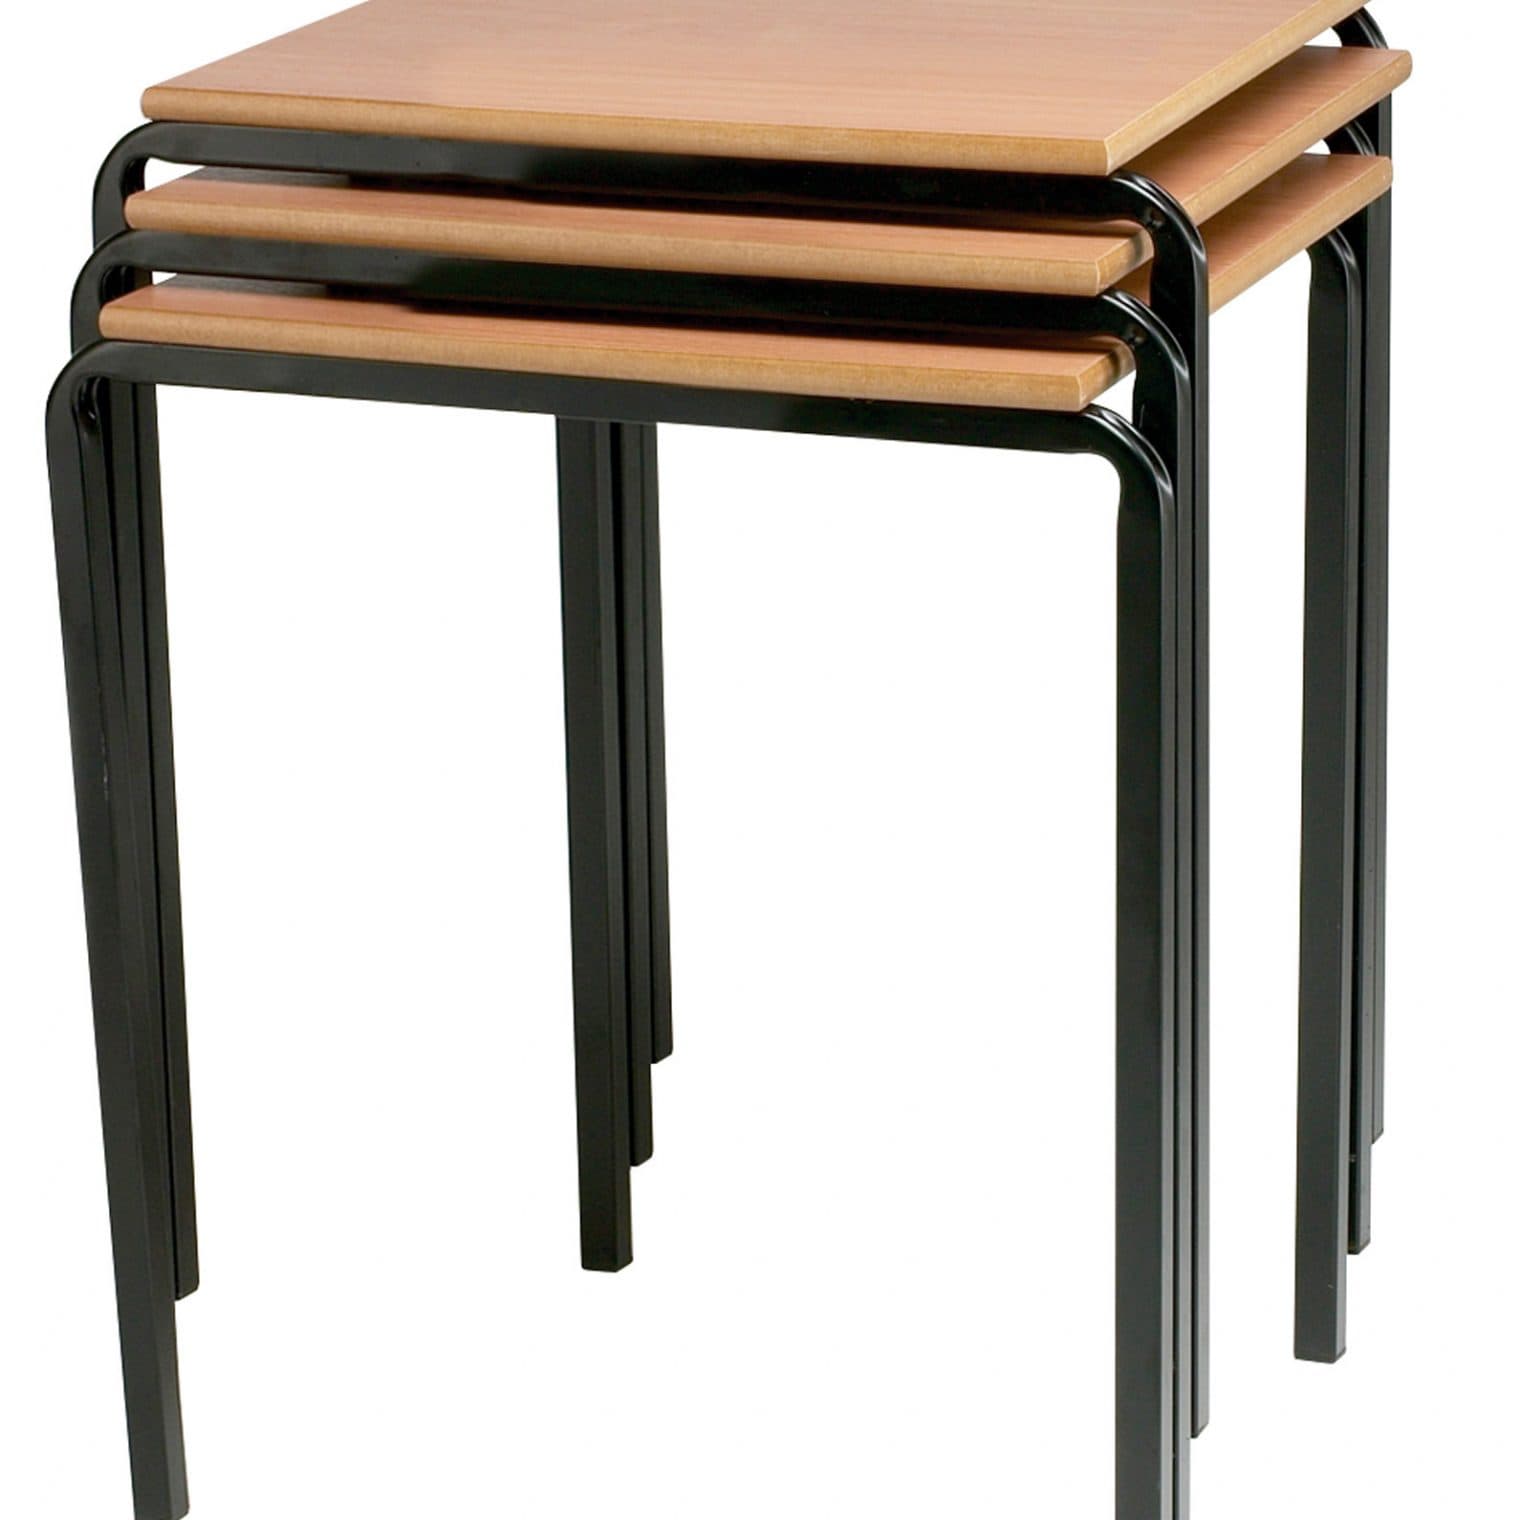 Crushbent Square Classroom Tables